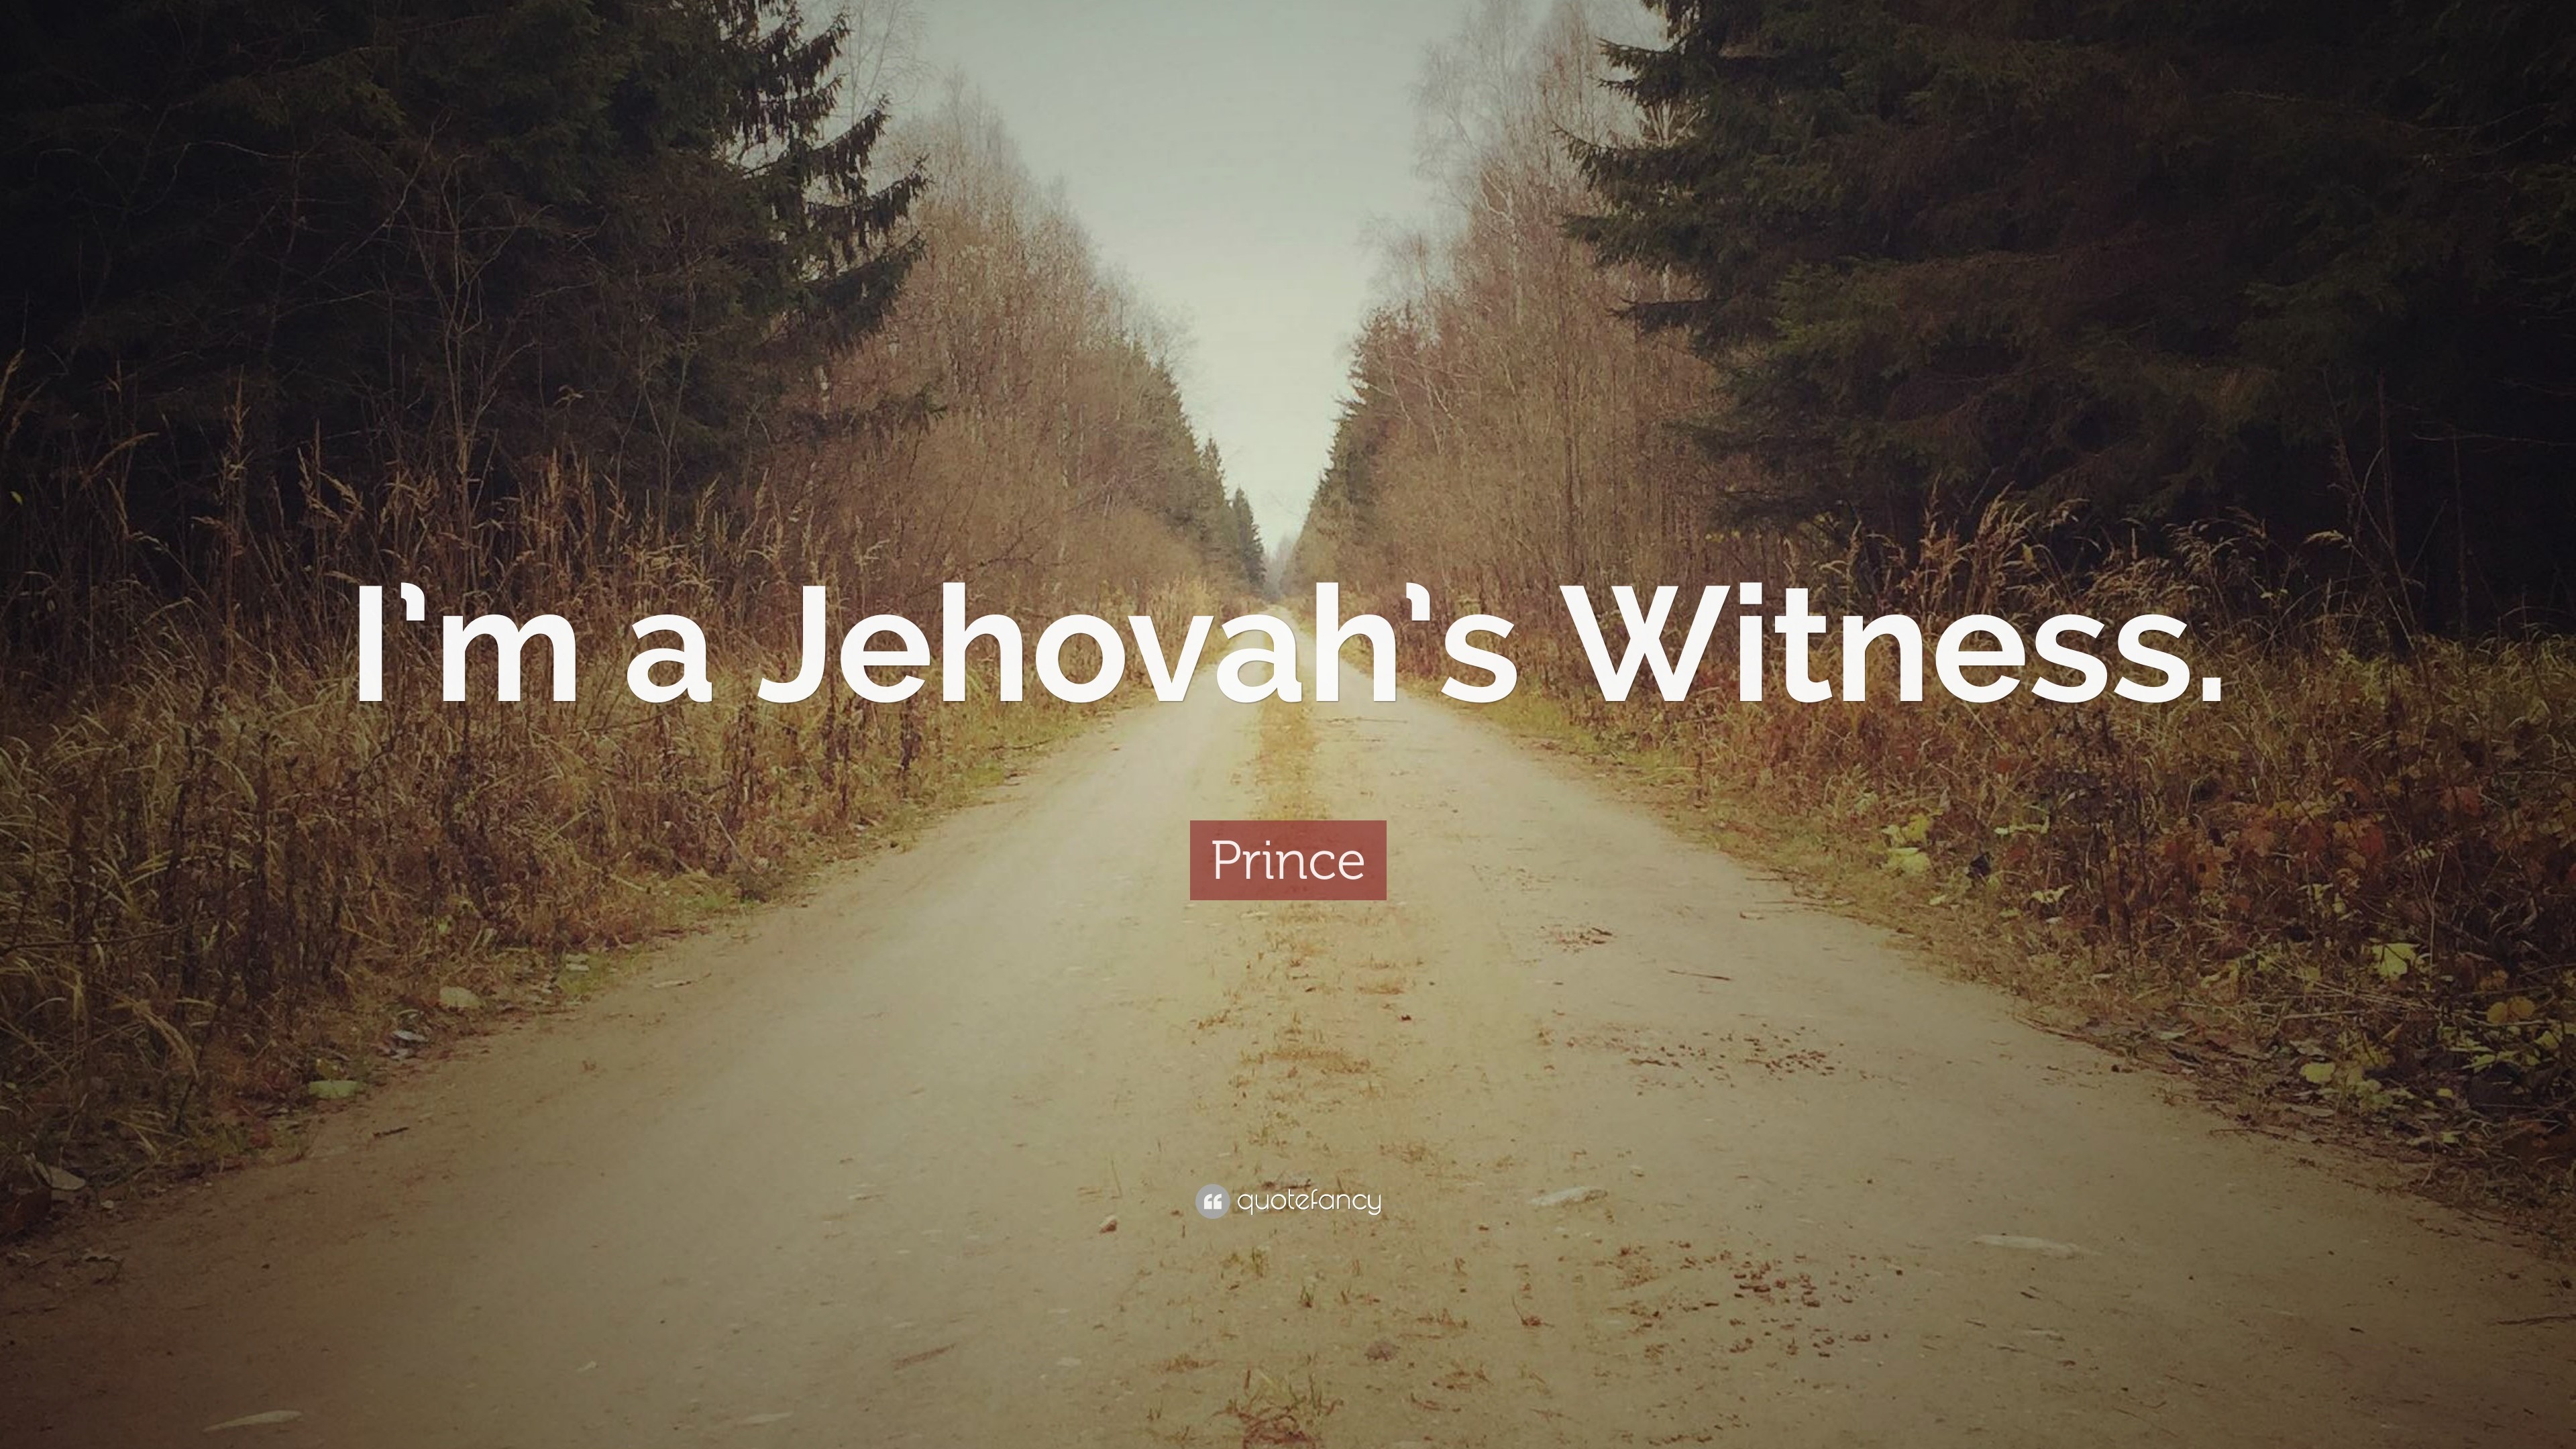 3840x2160 Prince Quote: “I'm a Jehovah's Witness.”